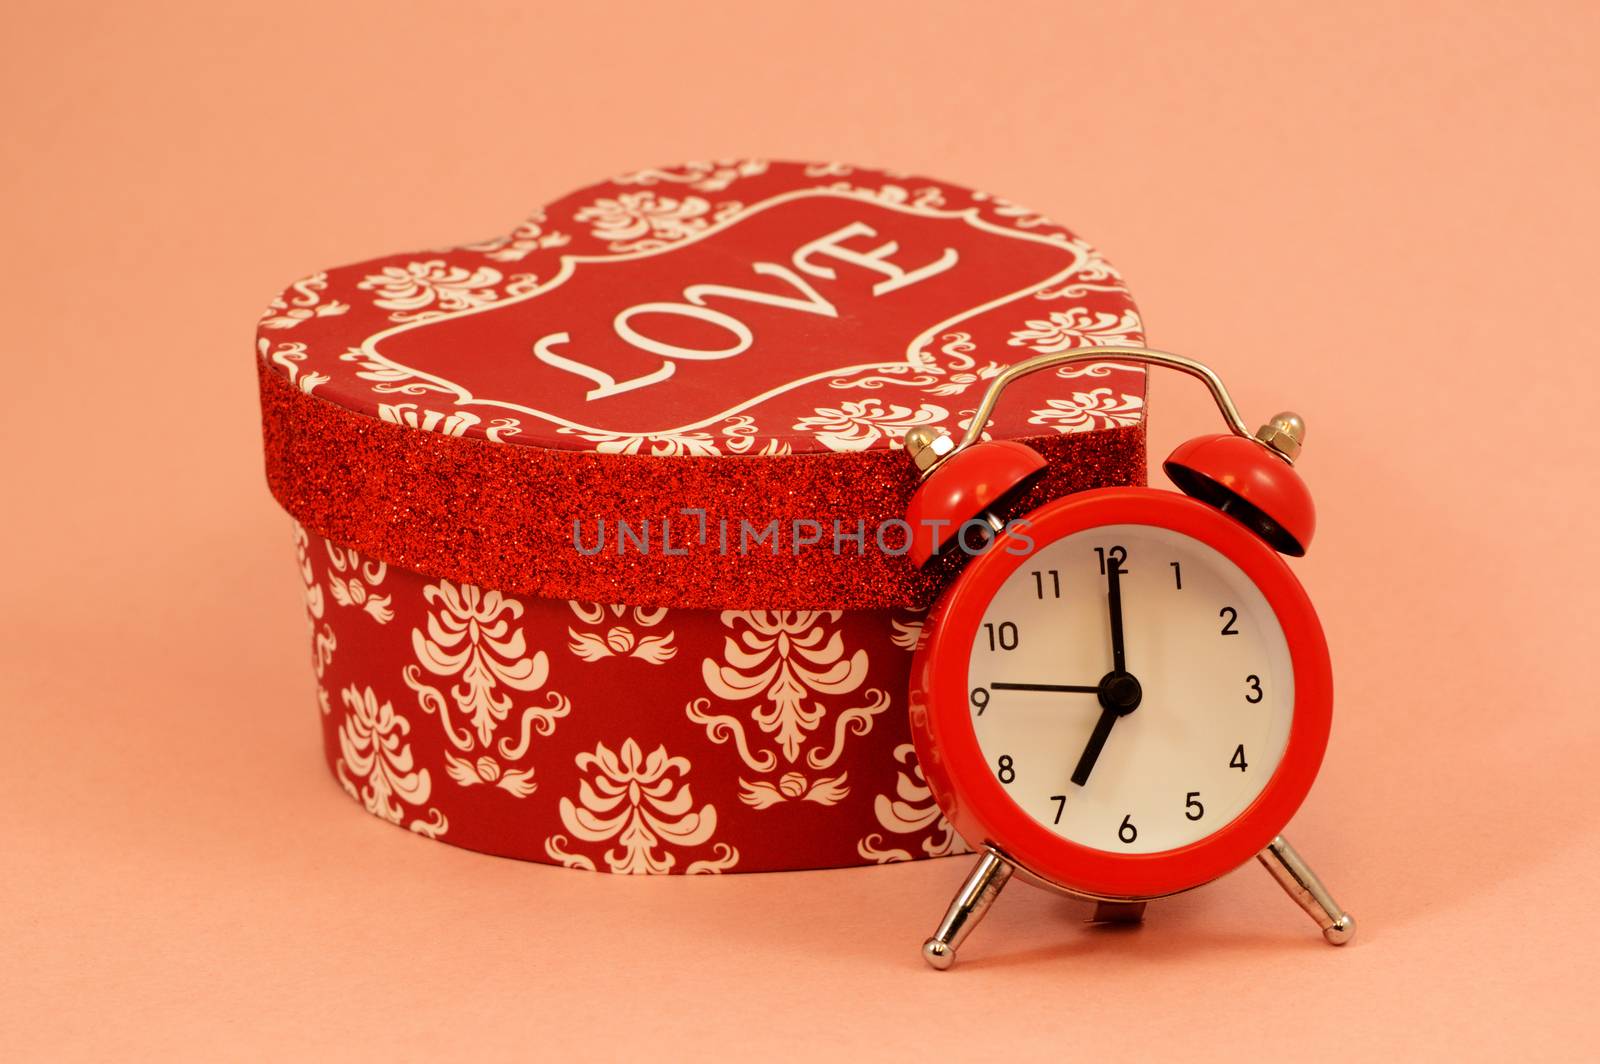 A red heart shaped gift box and an alarm clock over a pink background remind a romantic couple of important times.